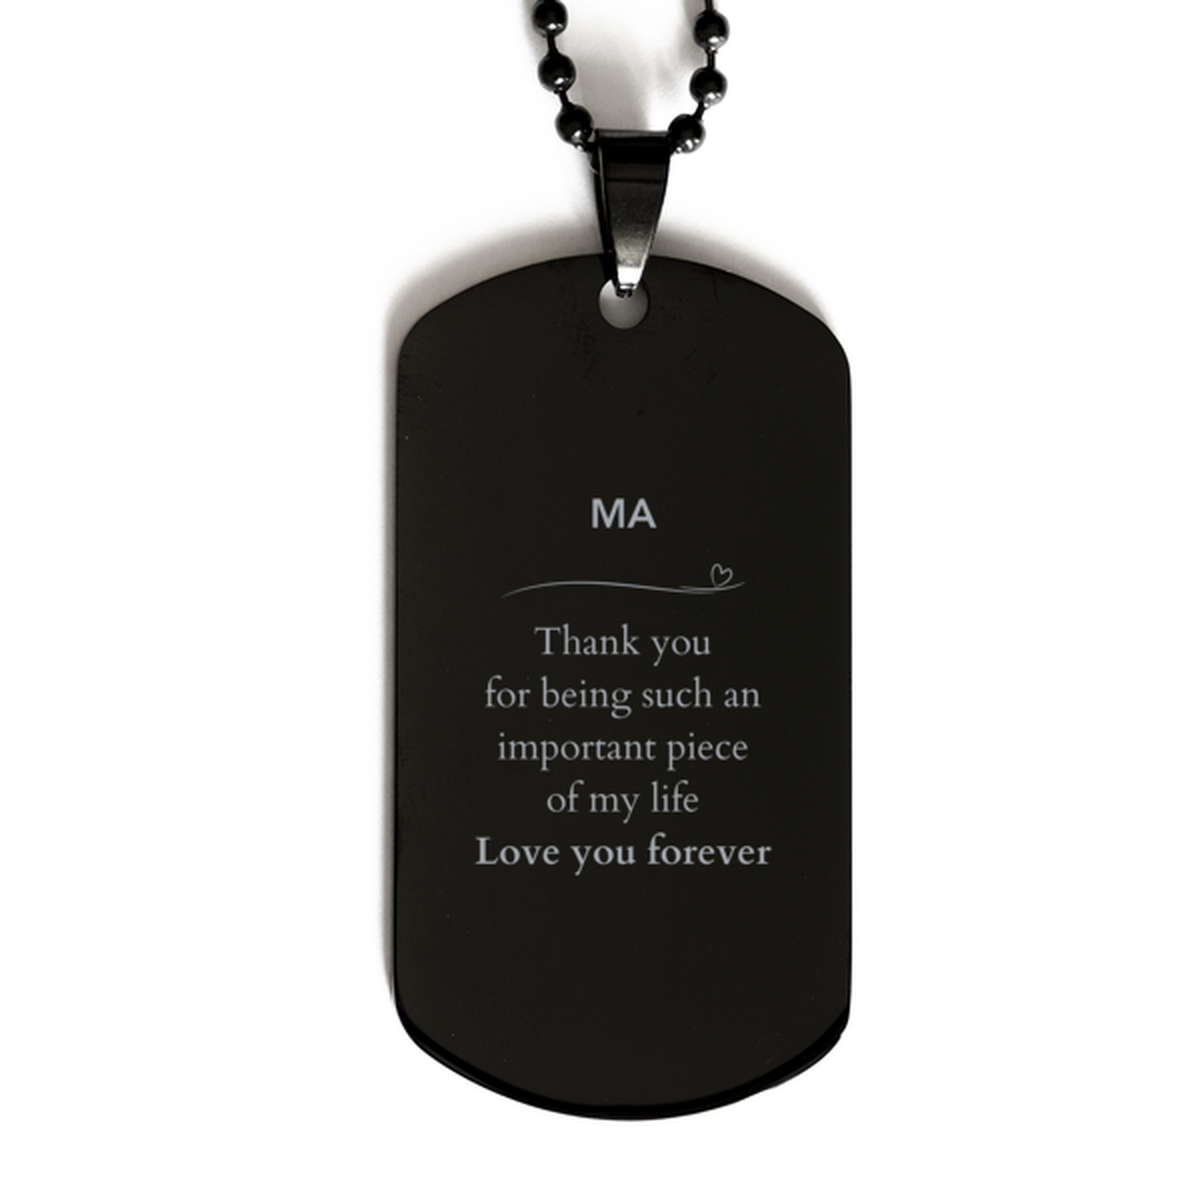 Appropriate Ma Black Dog Tag Epic Birthday Gifts for Ma Thank you for being such an important piece of my life Ma Christmas Mothers Fathers Day